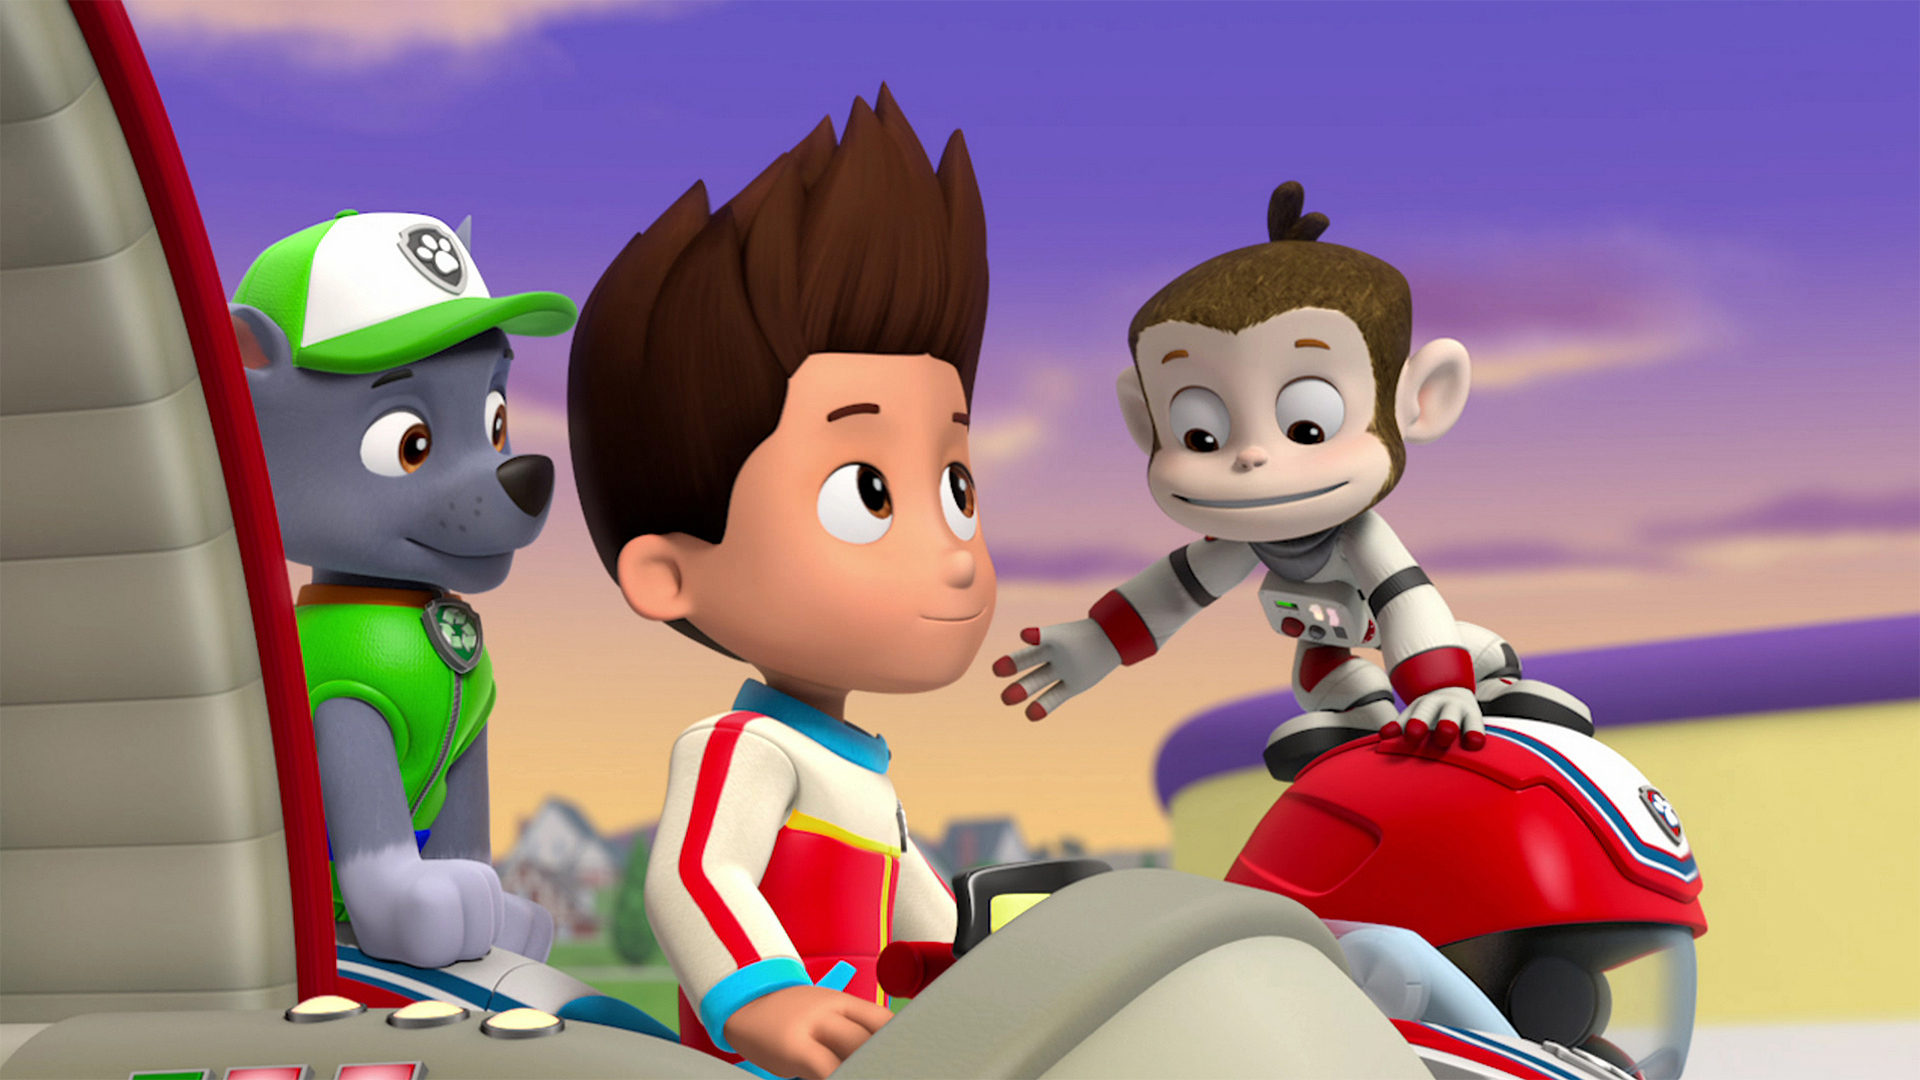 Watch PAW Patrol 3 Episode 10: Pups Save a Stinky Flower/Pups Save a Monkey-Naut - Full show on Paramount Plus